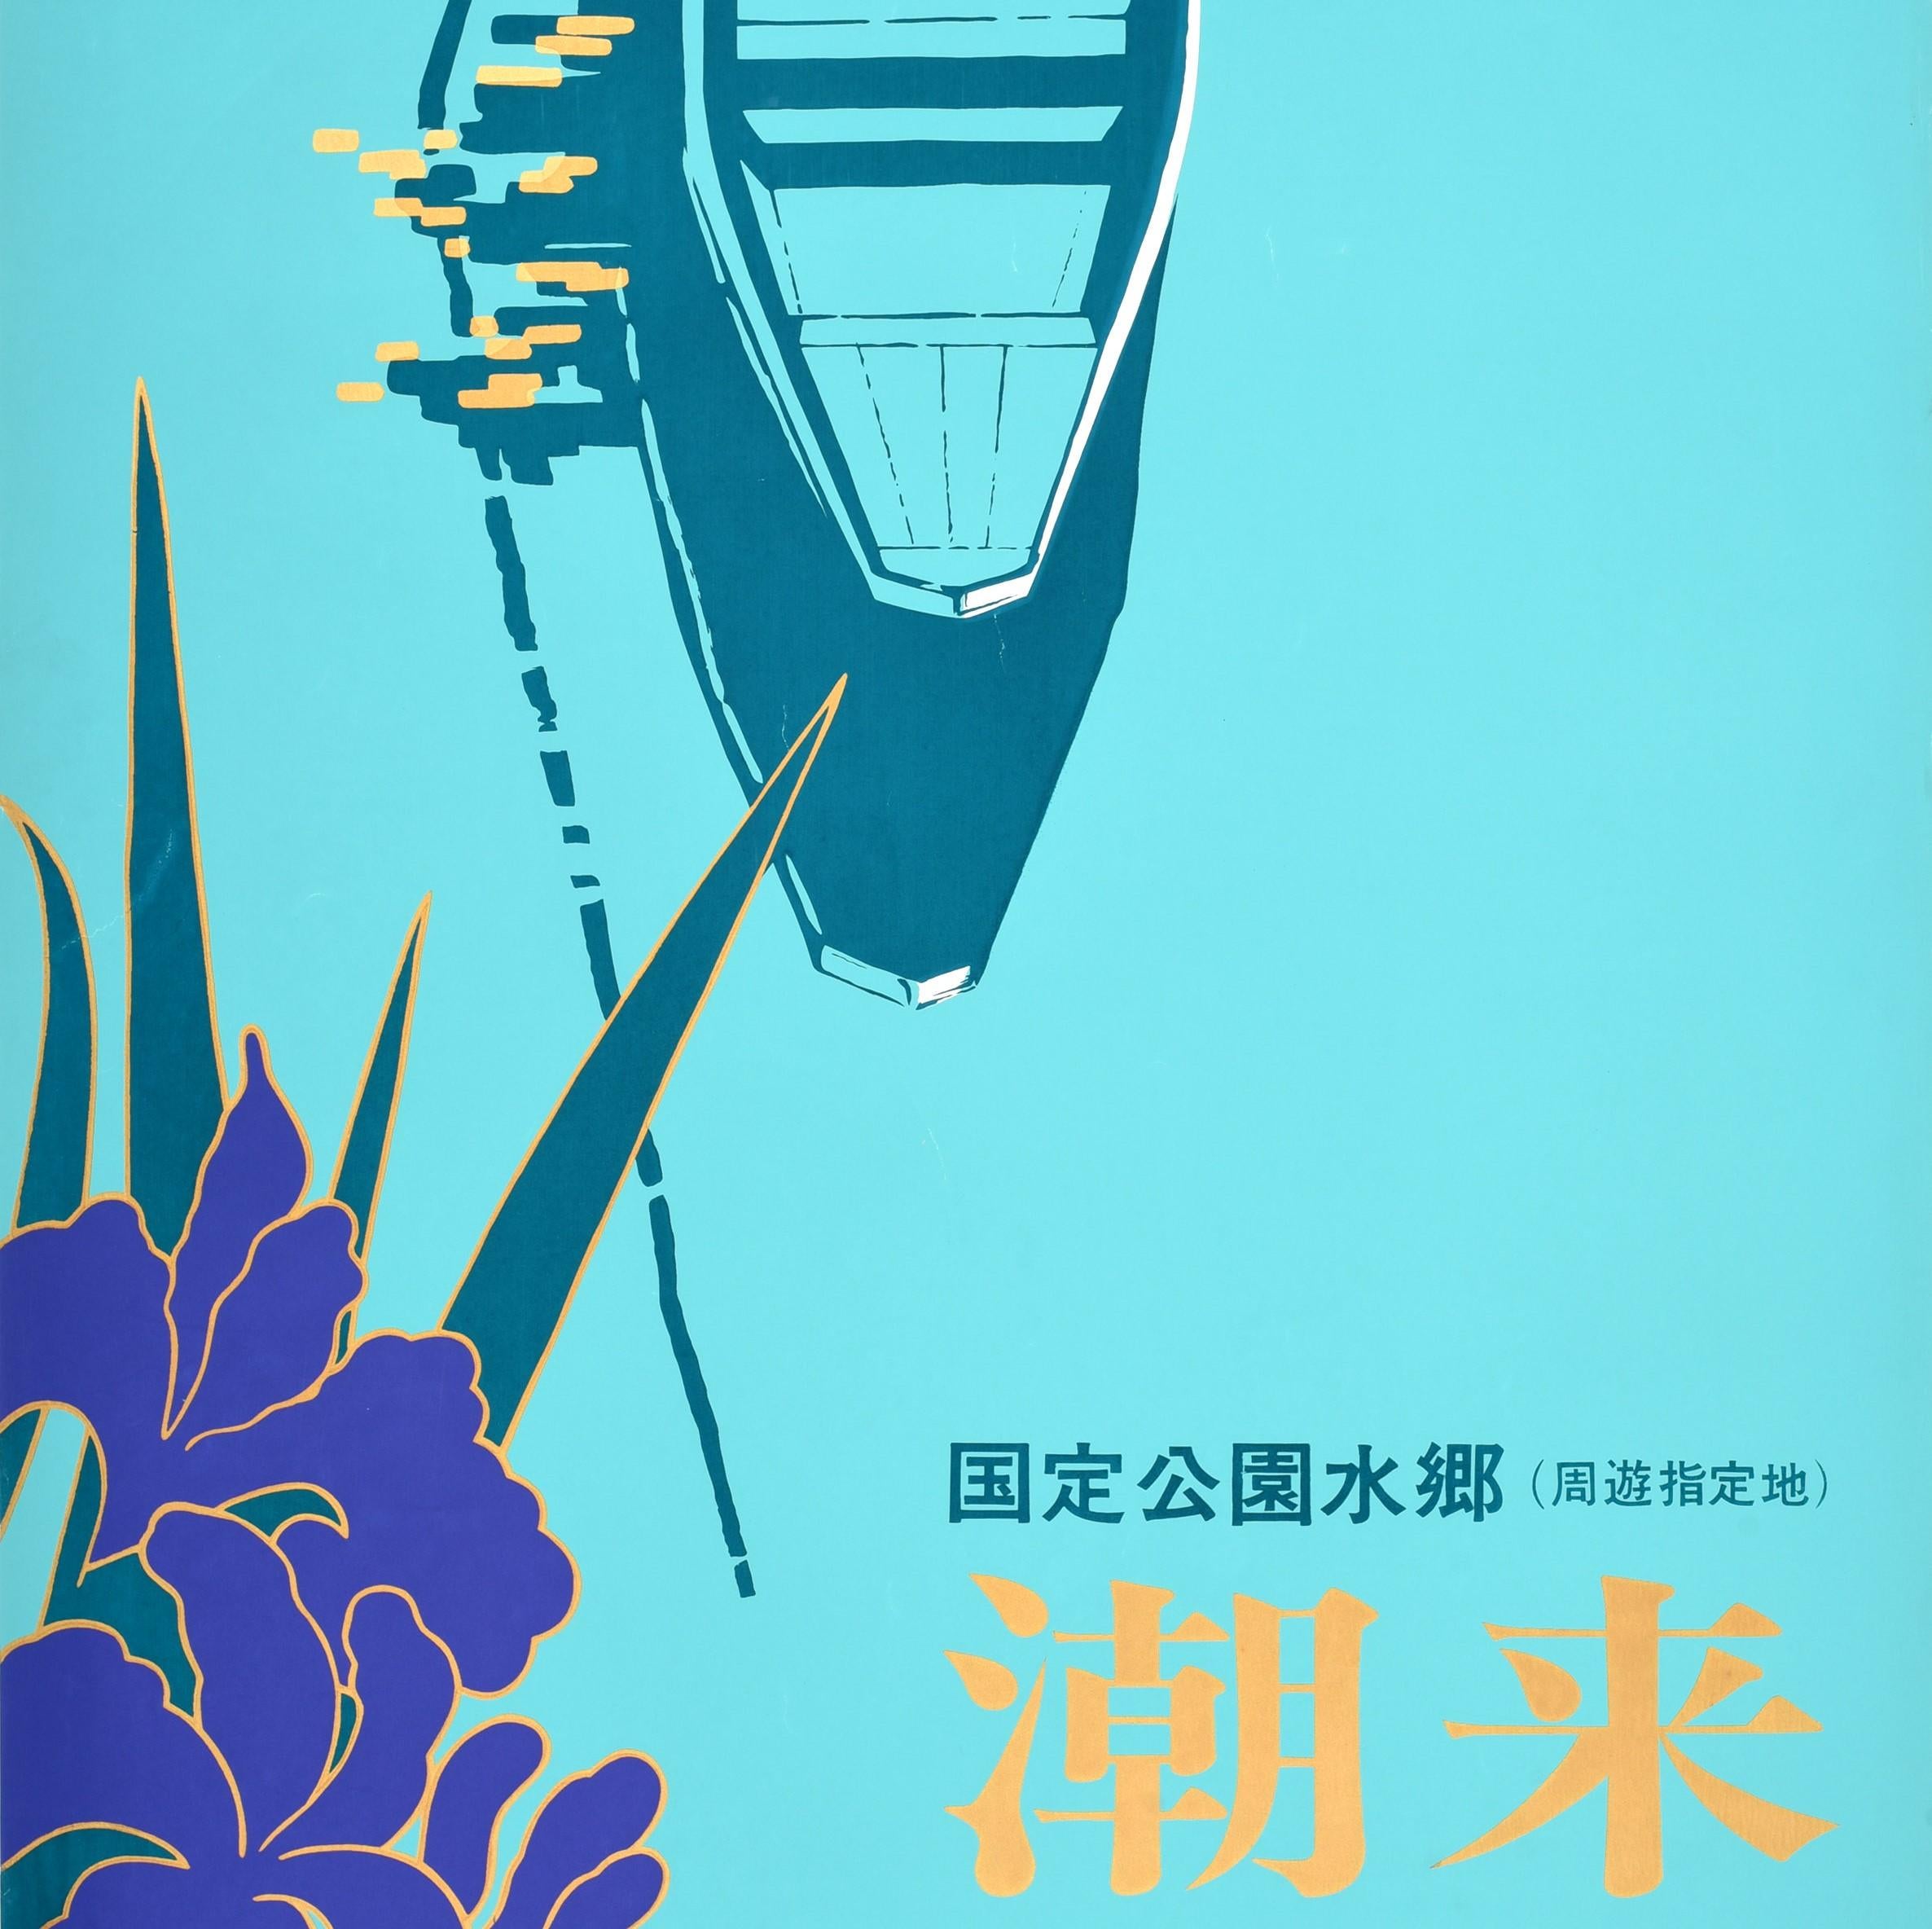 Original vintage Japan travel poster for the Itako and Suigo-Tsukuba Quasi-National Park on Honshu island featuring peaceful artwork showing the front of a wooden boat on a lake with iris flowers and leaves in the foreground, the boat and rowing oar